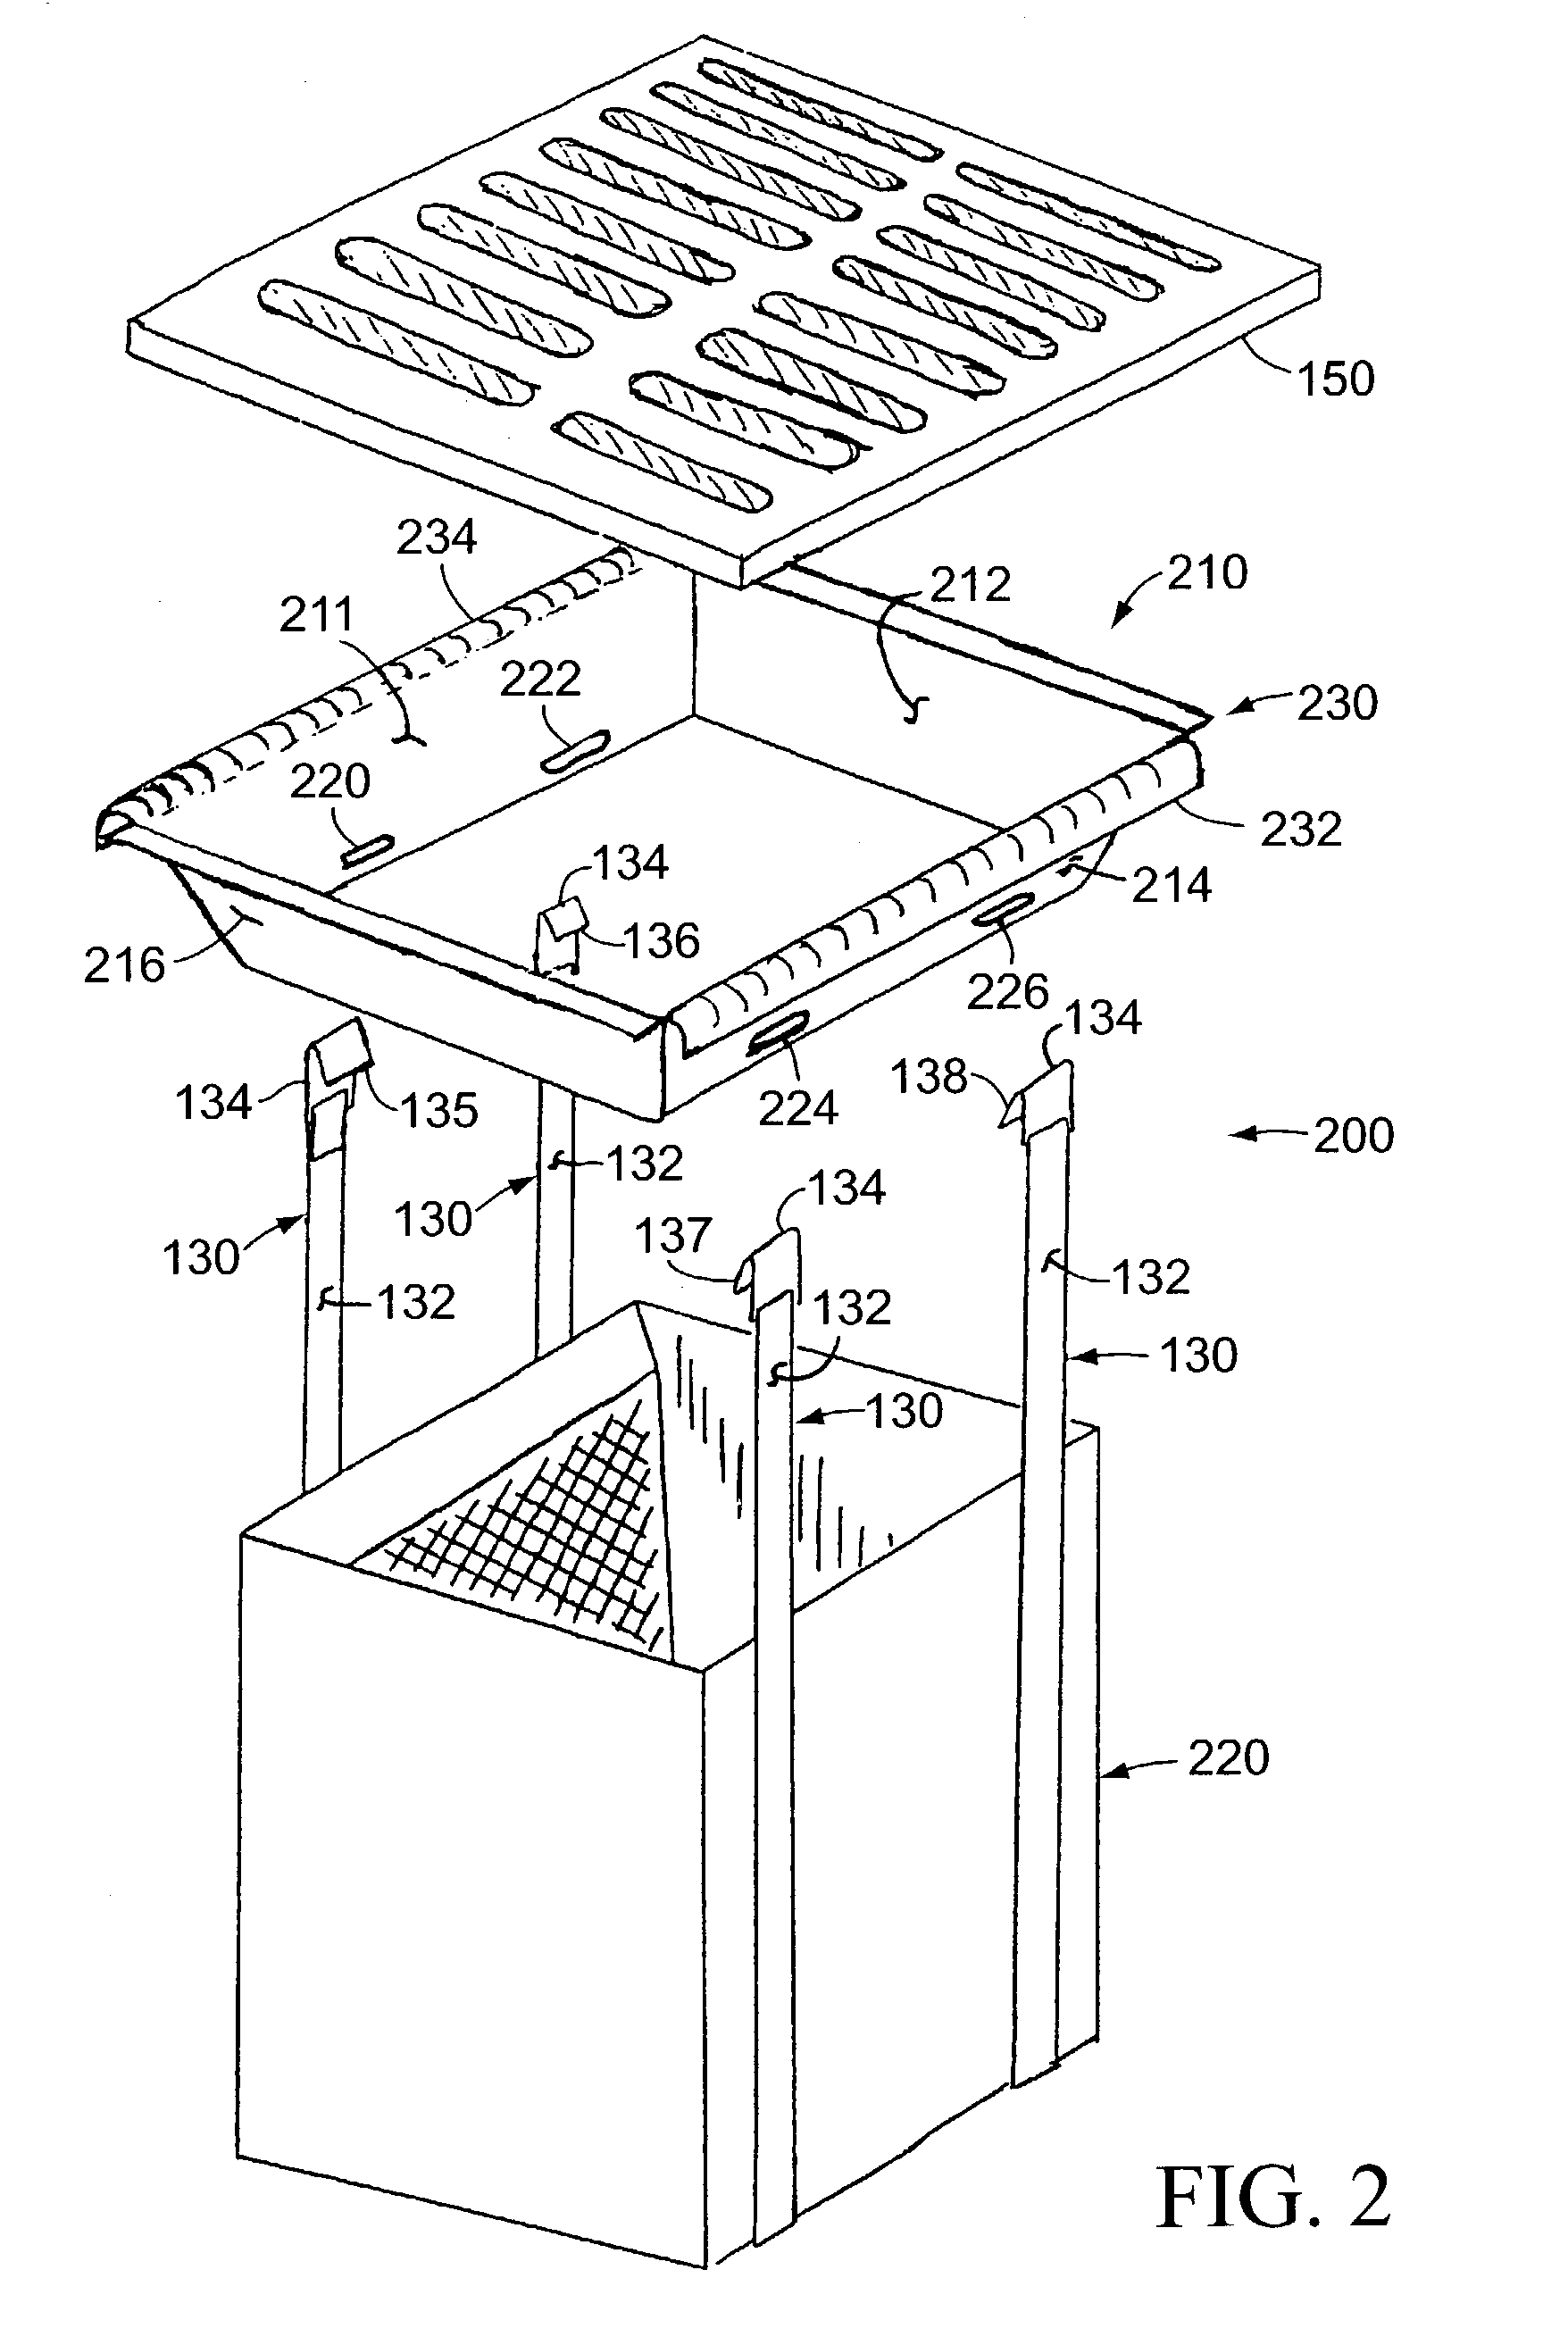 Method of making and using a filter in the form of a block of agglomerated copolymer fragments